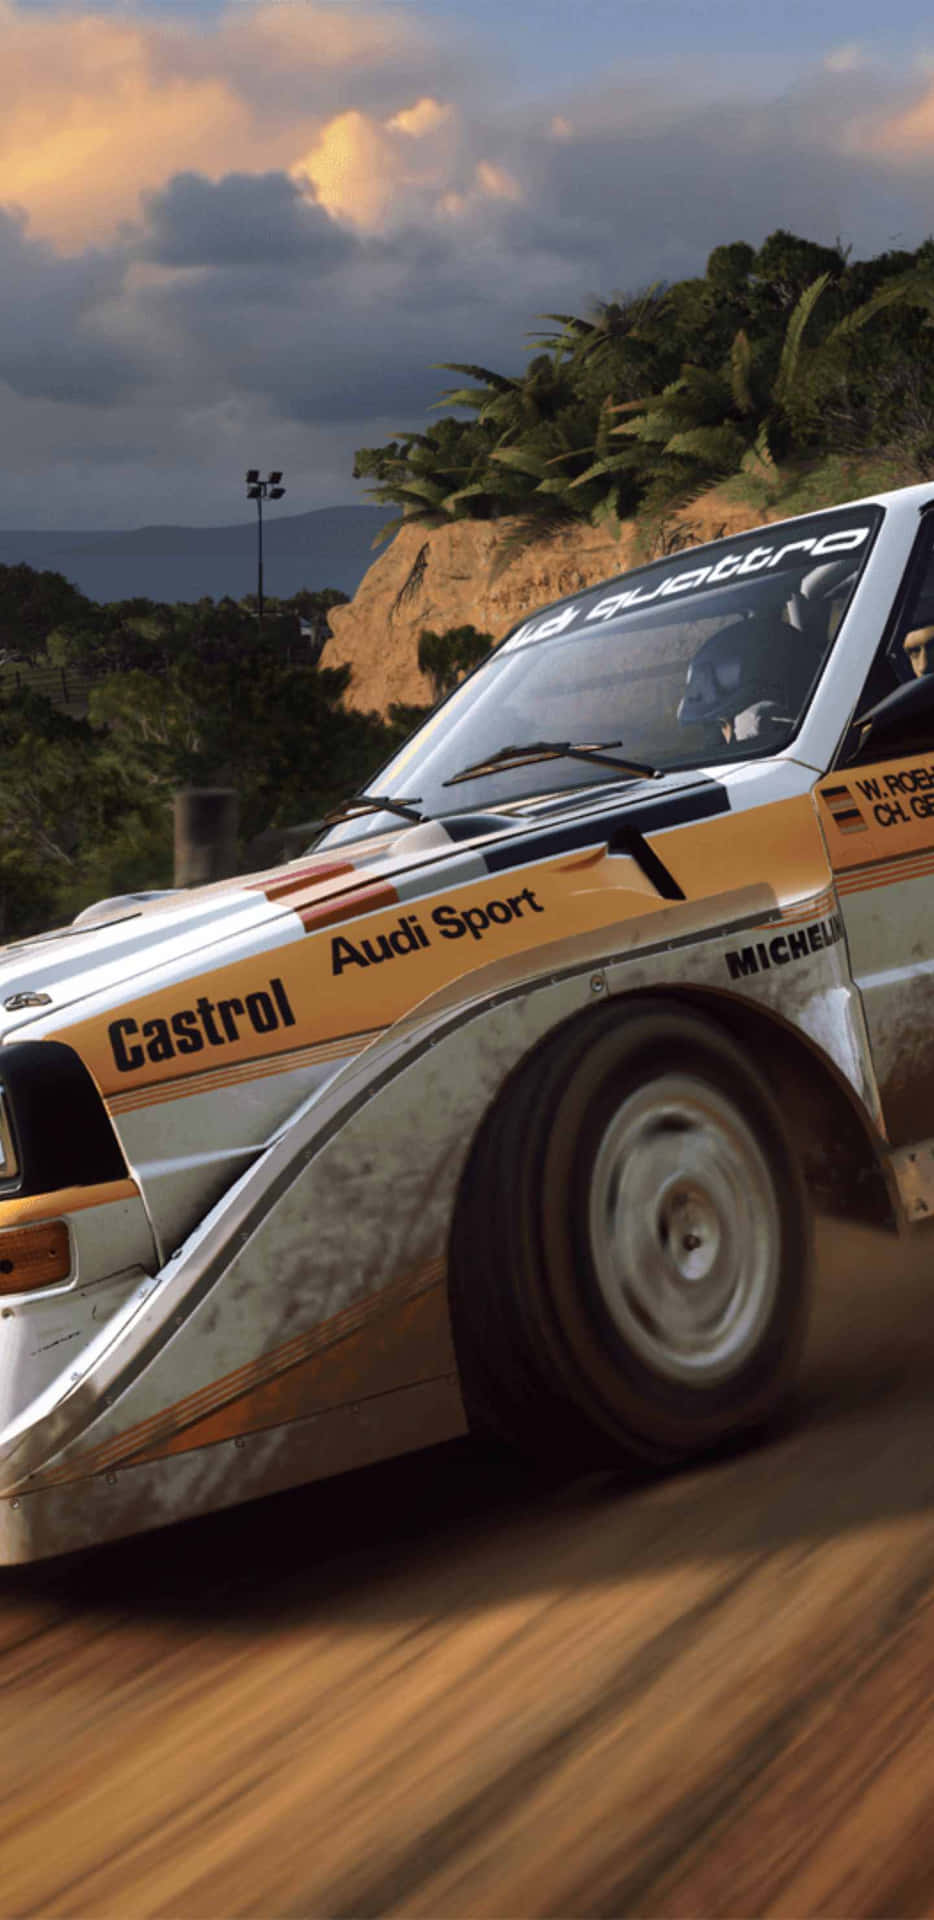 Feel the thrill of driving through dangerous courses with Android Dirt Rally